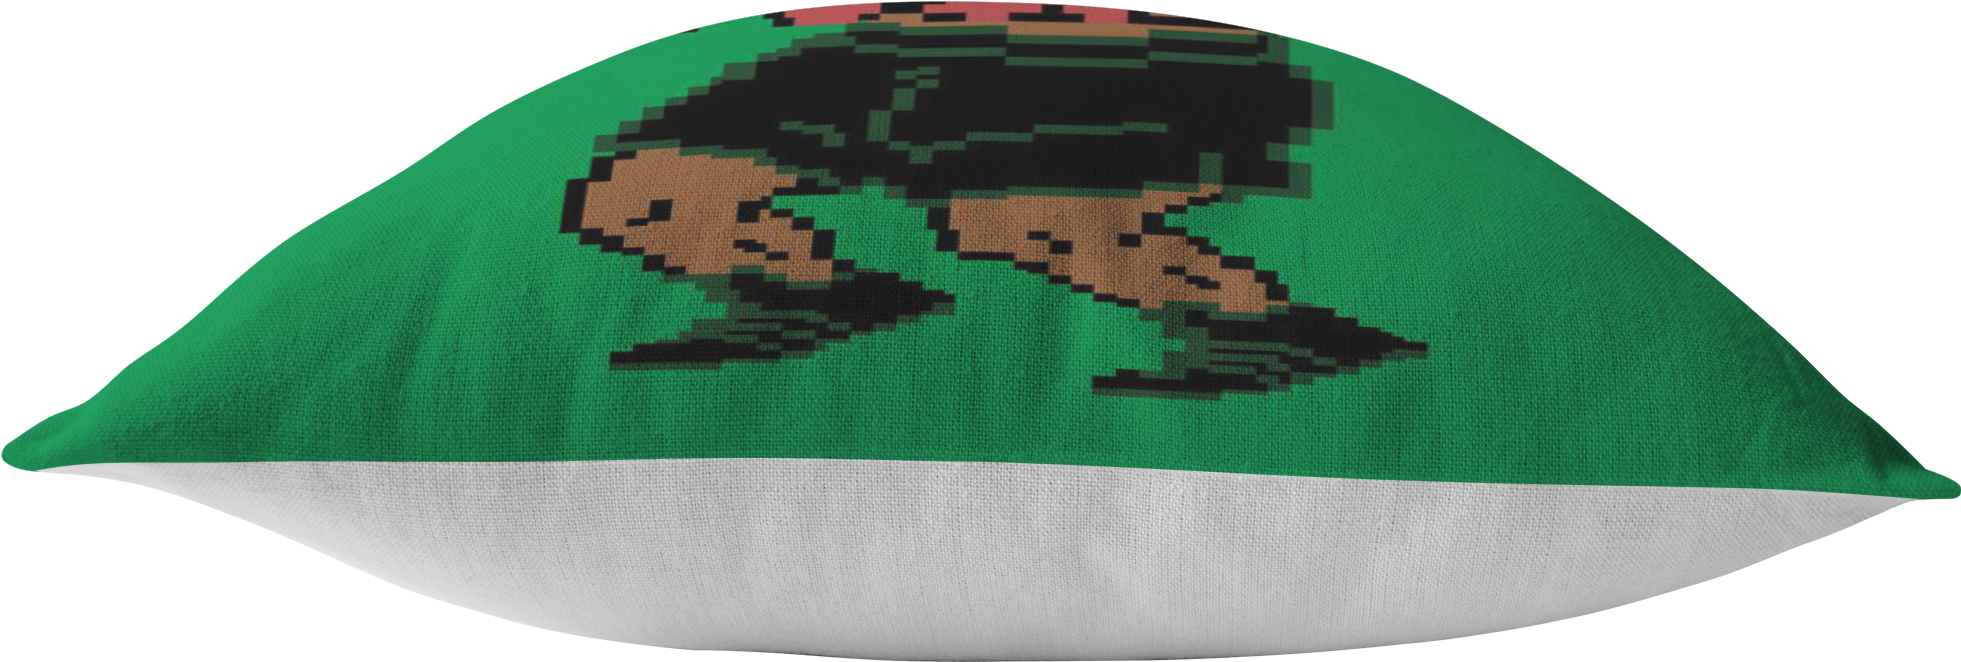 Retro Mike Tyson Punchout Inspired Pillow'class= - Possum, Hd Png Download